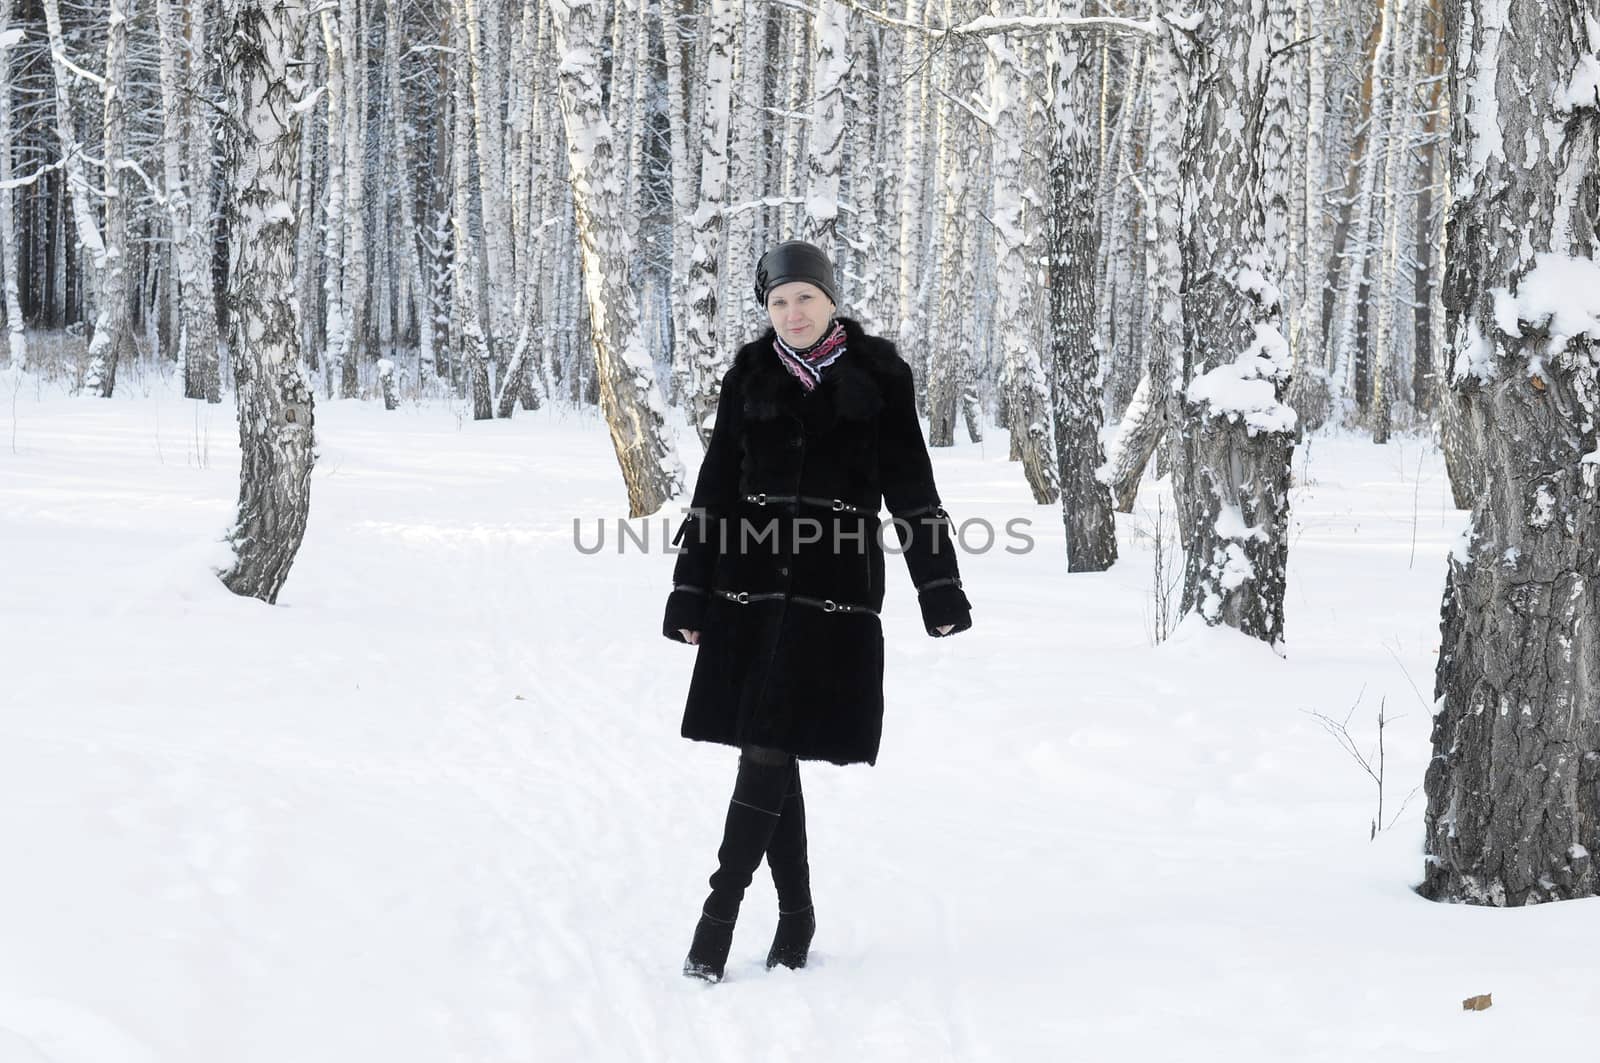 The woman in a black fur coat costs in the birch wood in the win by veronka72